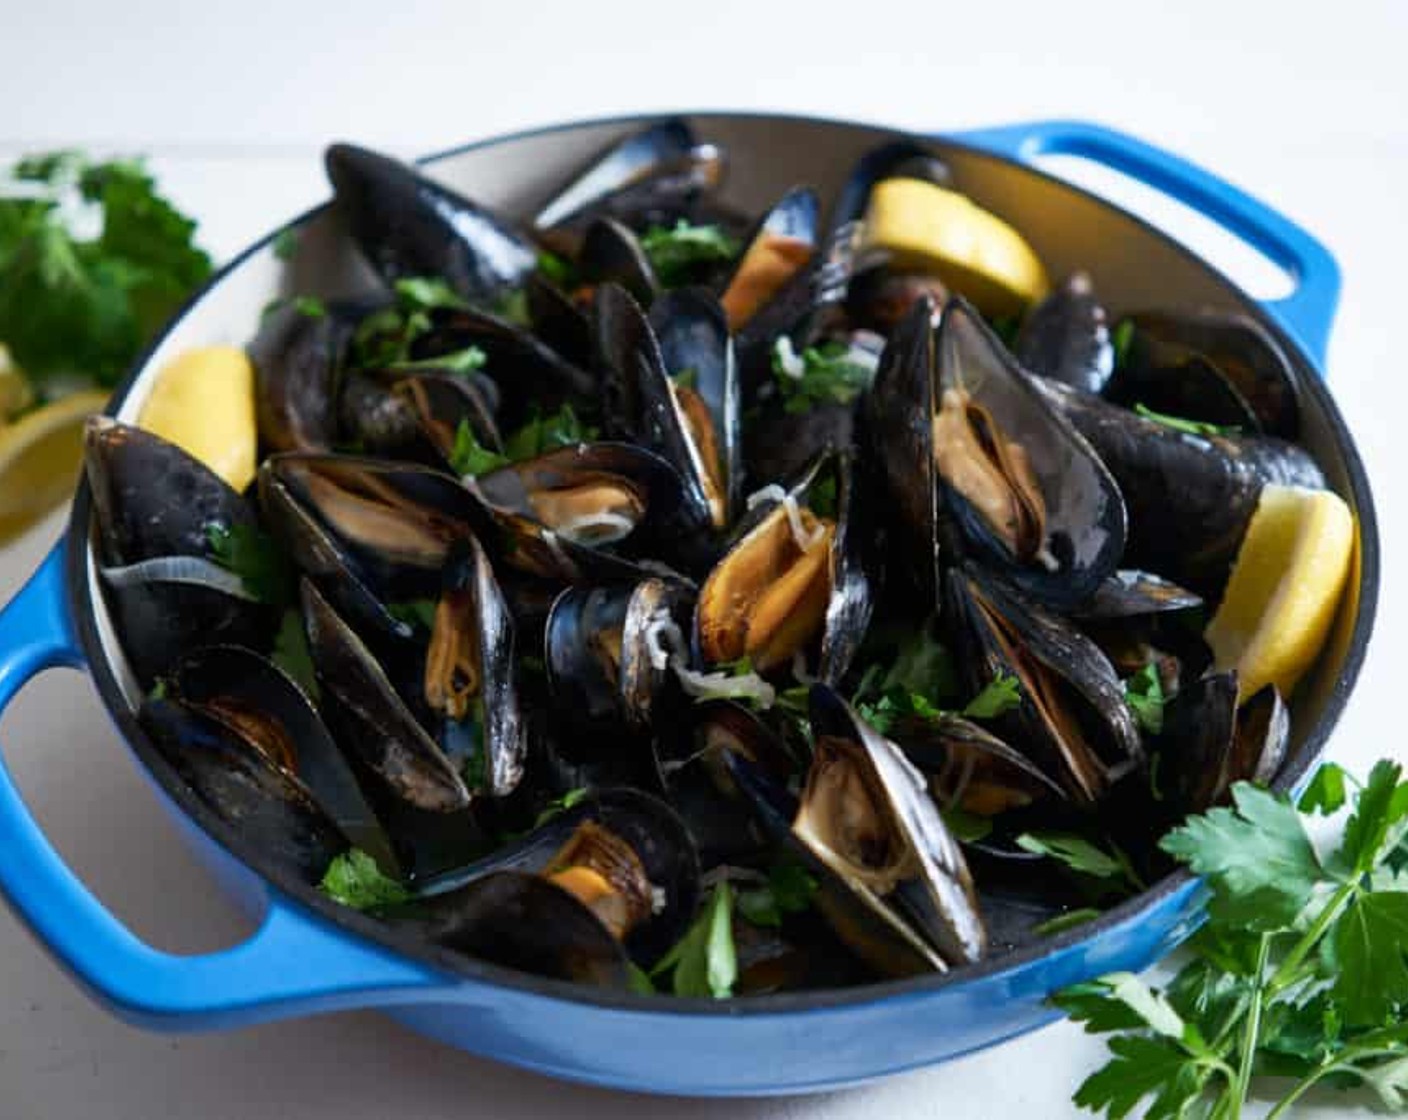 step 7 Remove lid, add Butter (2 Tbsp), swirl, and stir. Remove any mussels that have not opened. Do not eat a mussel that didn't open! Transfer mussels to serving bowls, spoon sauce over them, top with Italian Flat-Leaf Parsley (to taste). Serve with crusty bread.